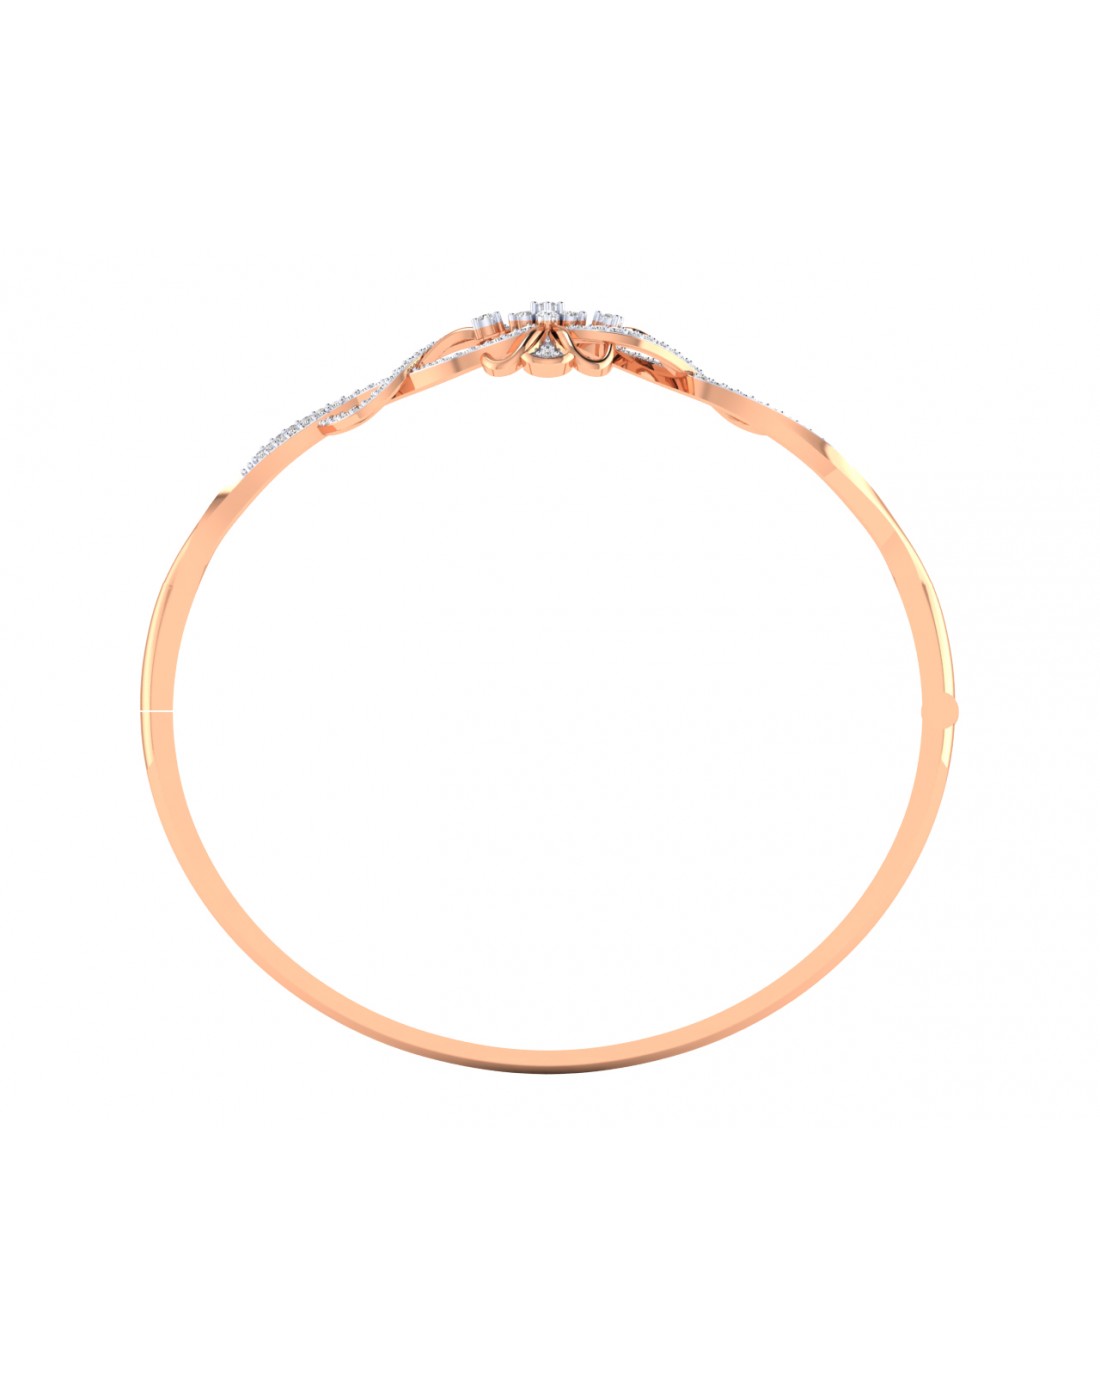 Online Jewellery Shopping - Fain Ladies Diamond Bangle in Gold at ...